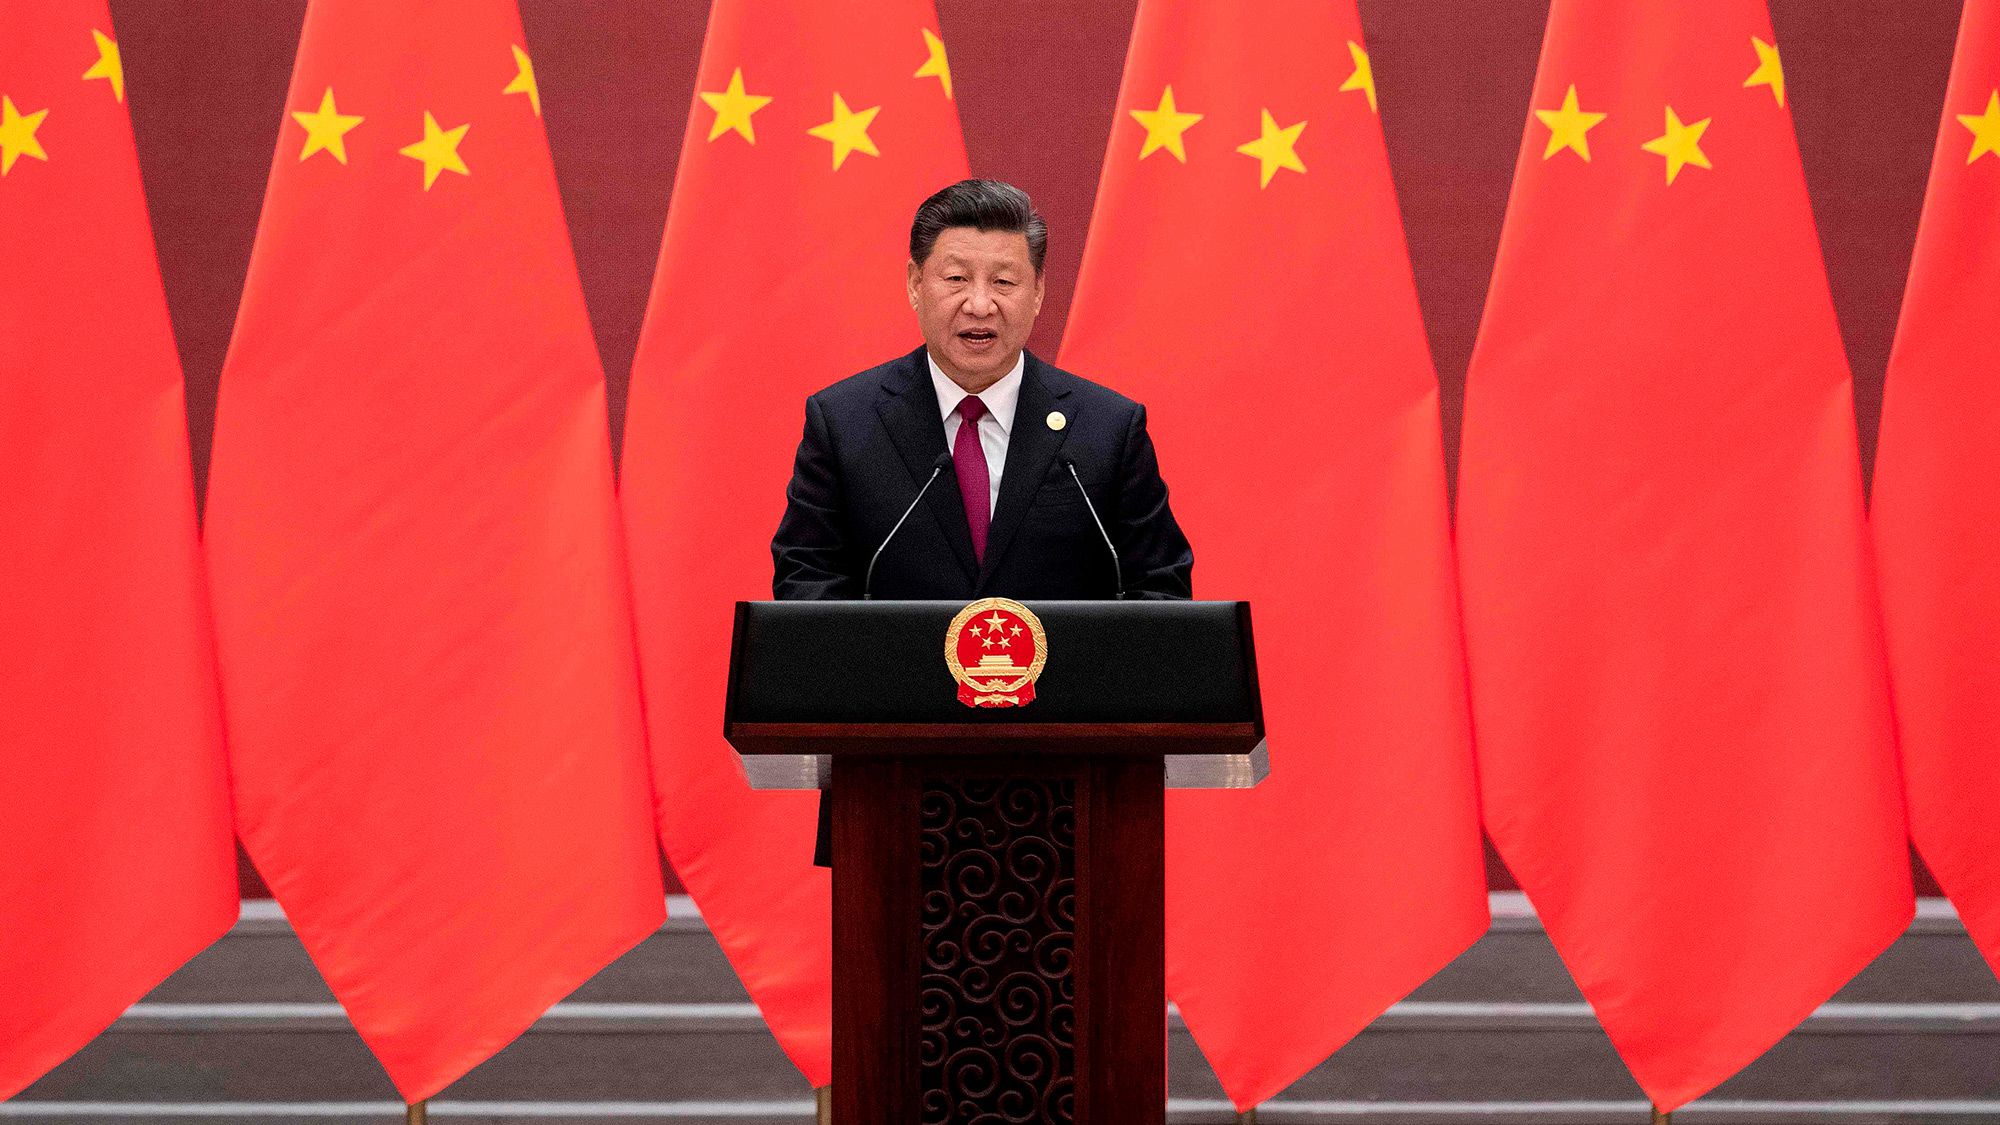 How Xi Jinping plans to tighten his grip at historic Chinese Communist Party Congress